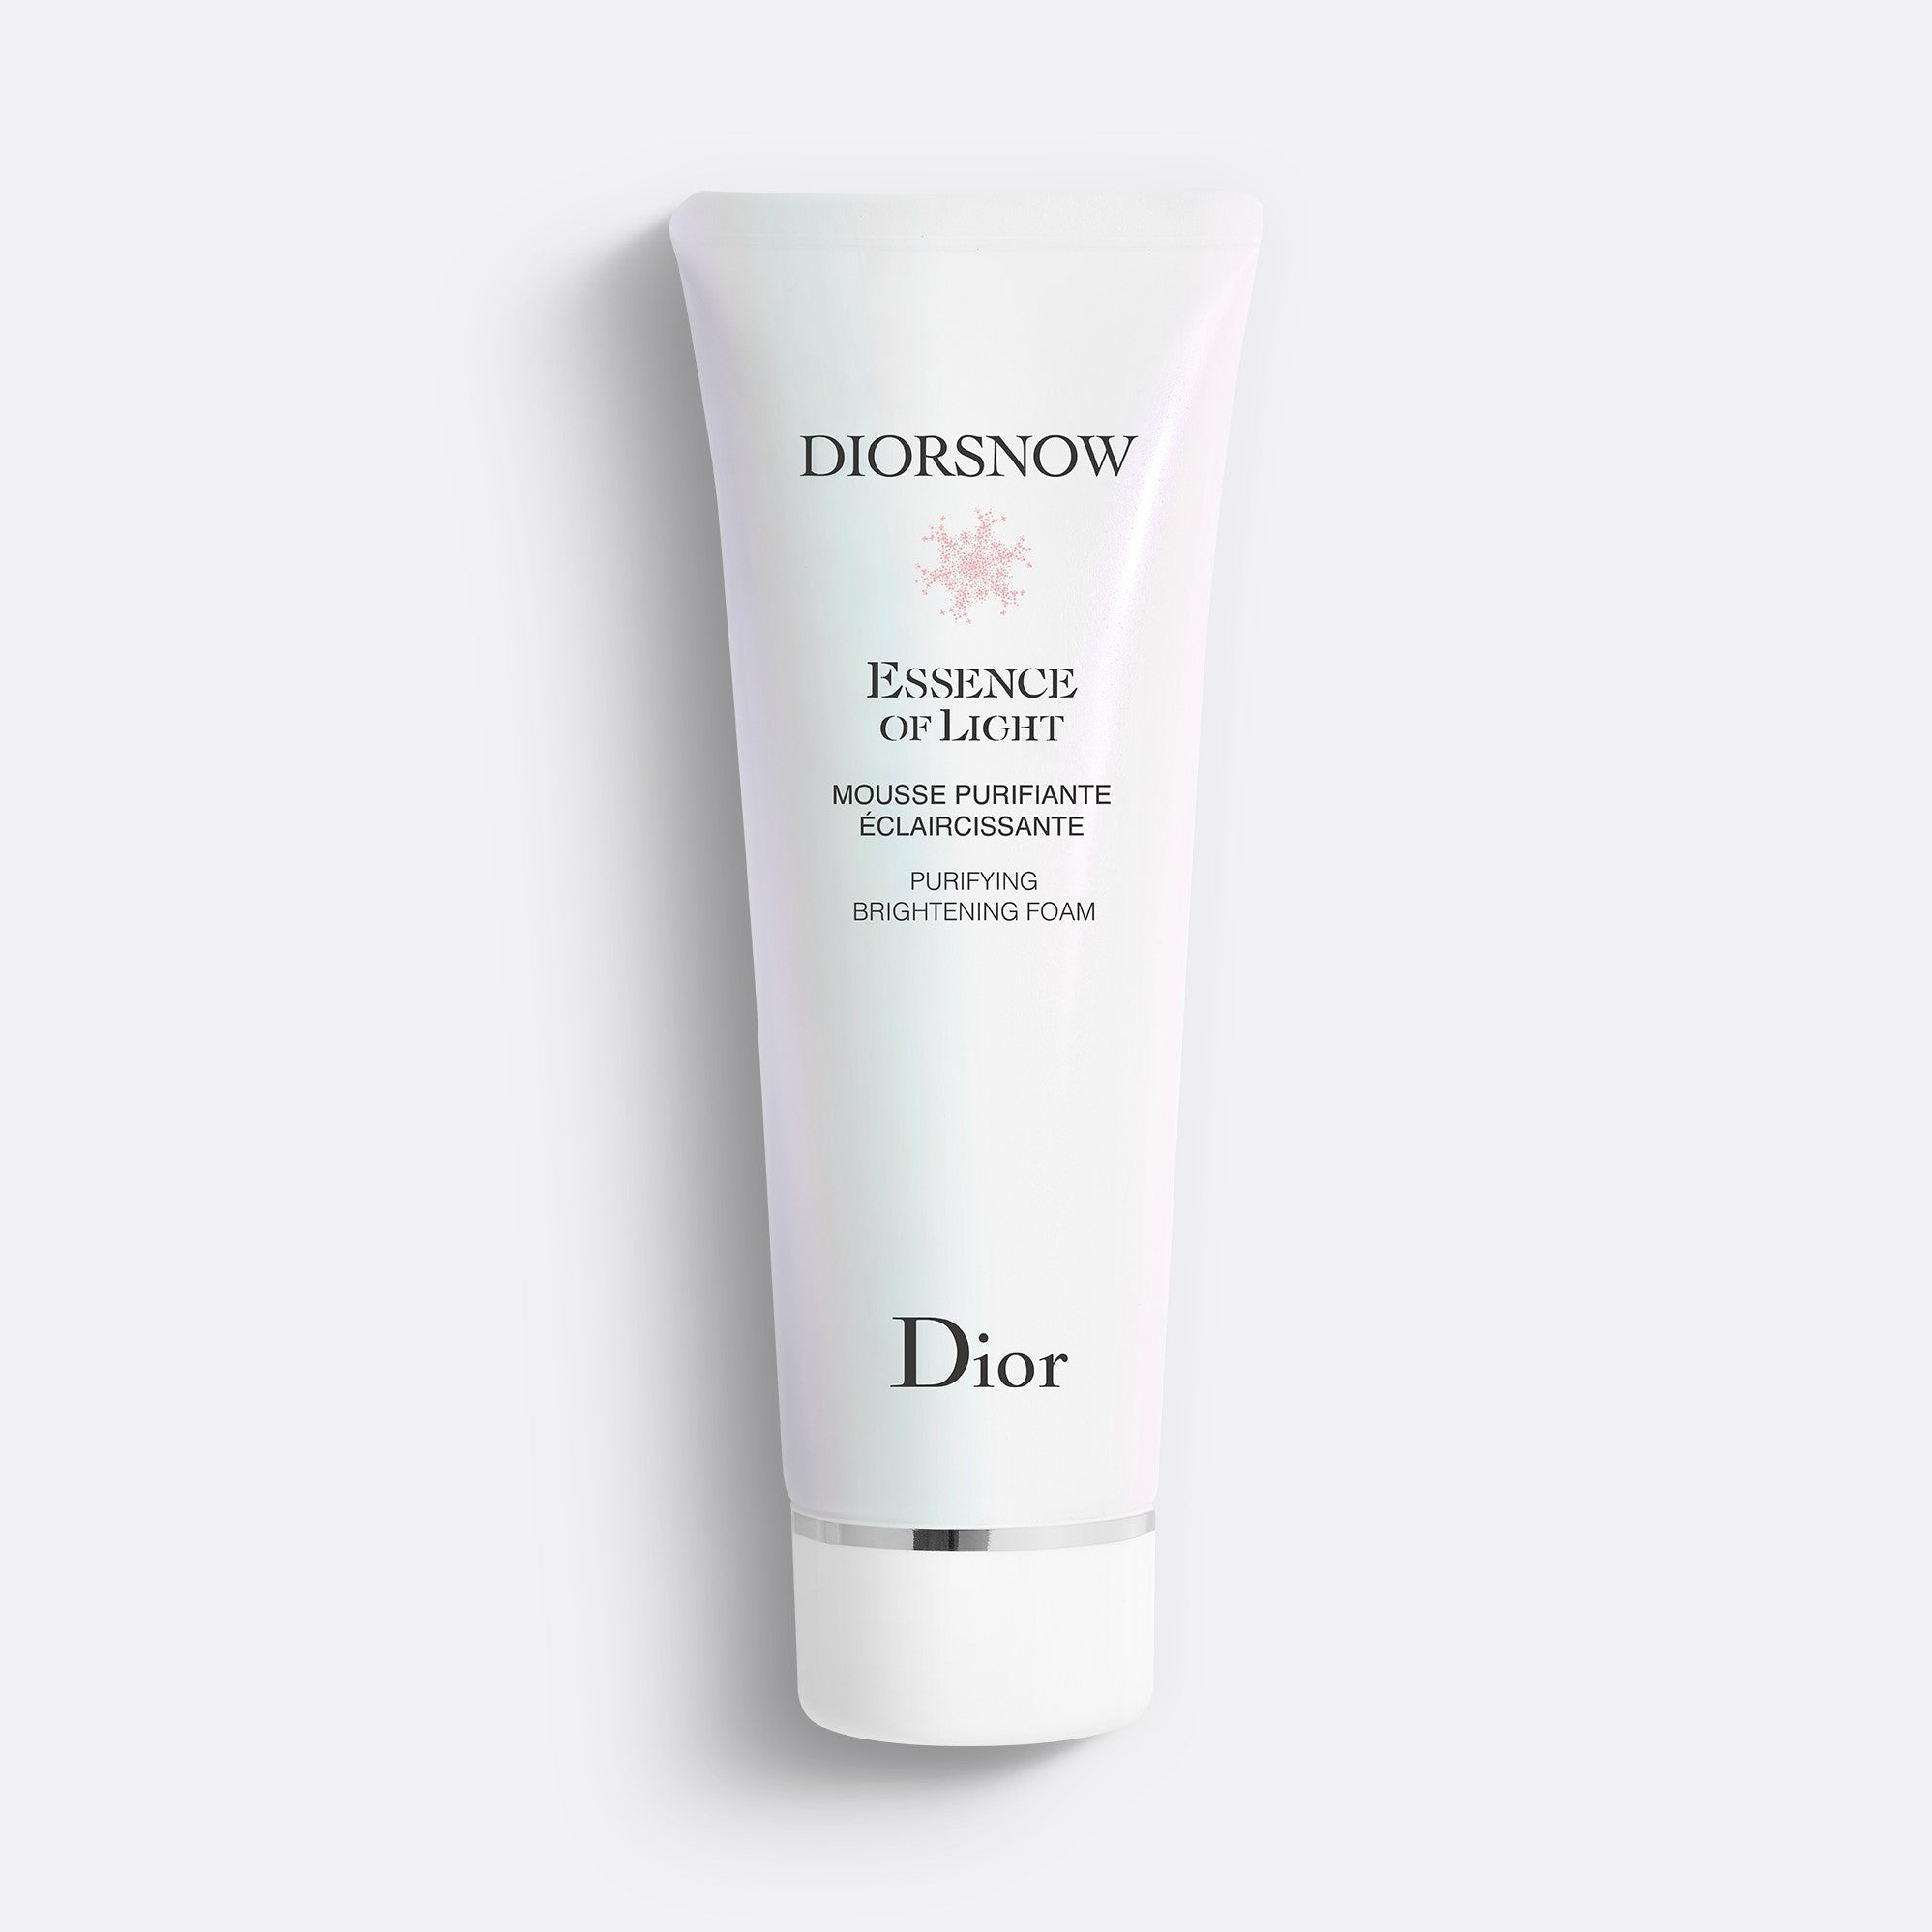 DIORSNOW ESSENCE OF LIGHT PURIFYING BRIGHTENING FOAM | Face Cleanser - Cleanses, Purifies and Revives Radiance